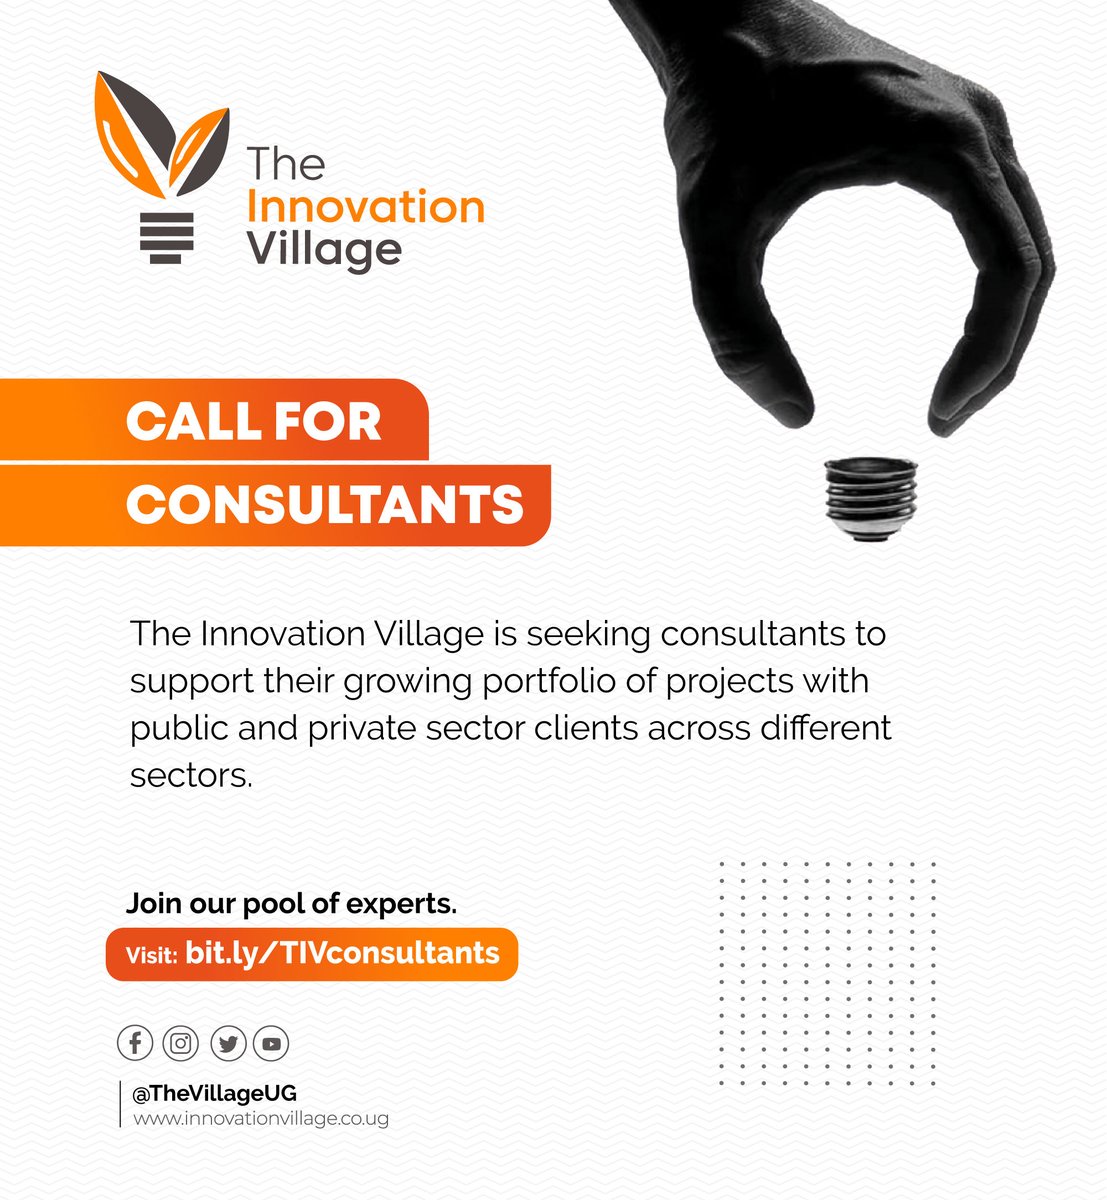 #CallForConsultants: The Innovation Village is looking for Innovation and Management Consultants that will help standardize work approaches to enable market and industry trends translate into actionable opportunities.

Visit bit.ly/TIVconsultants for more information.